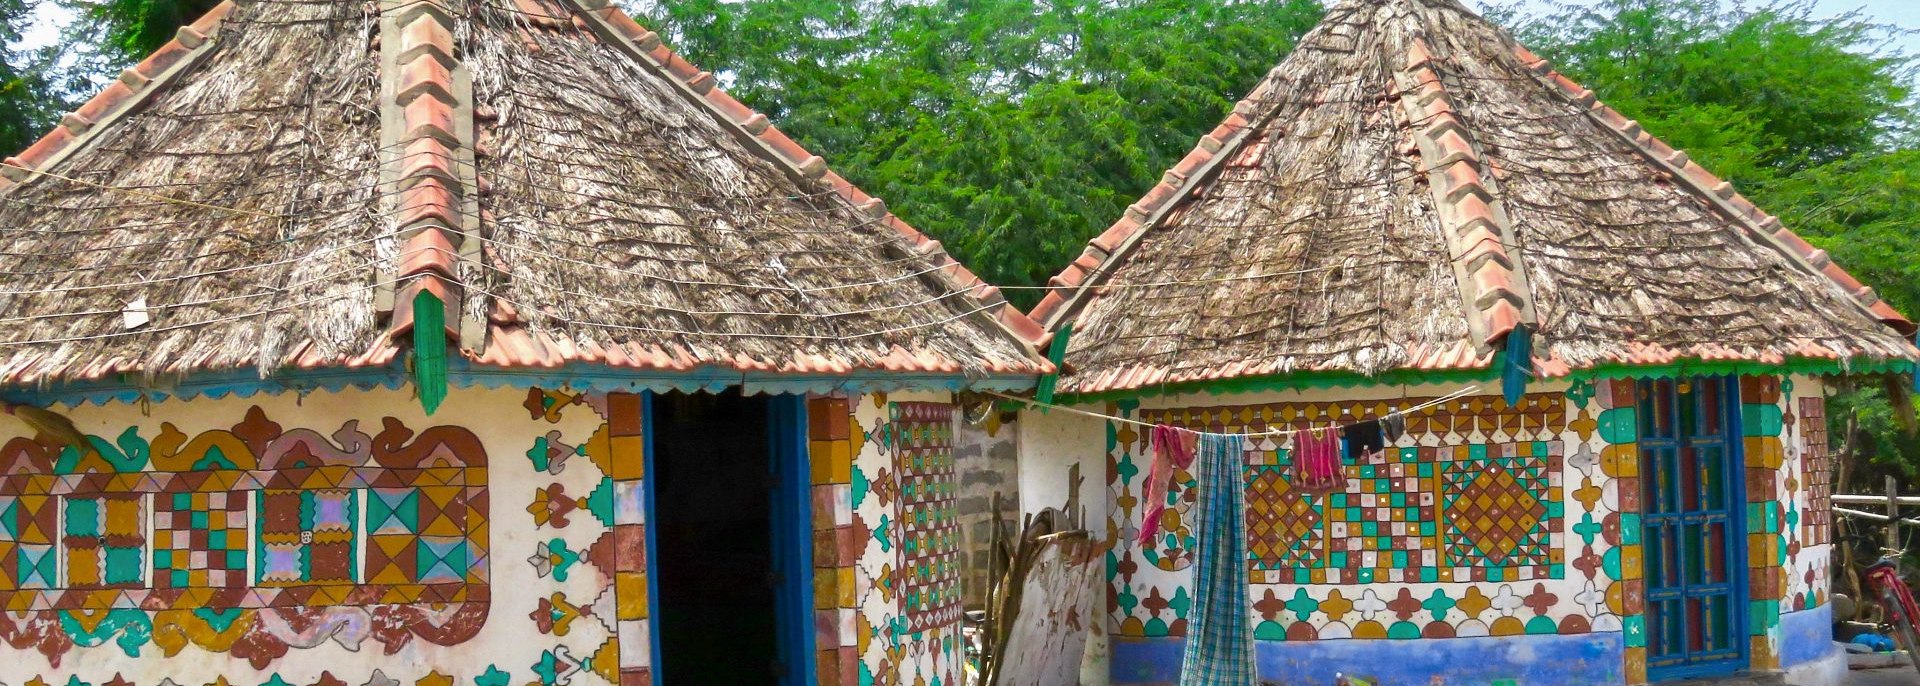 Decorated mud bungalows with painted patterns on the walls.